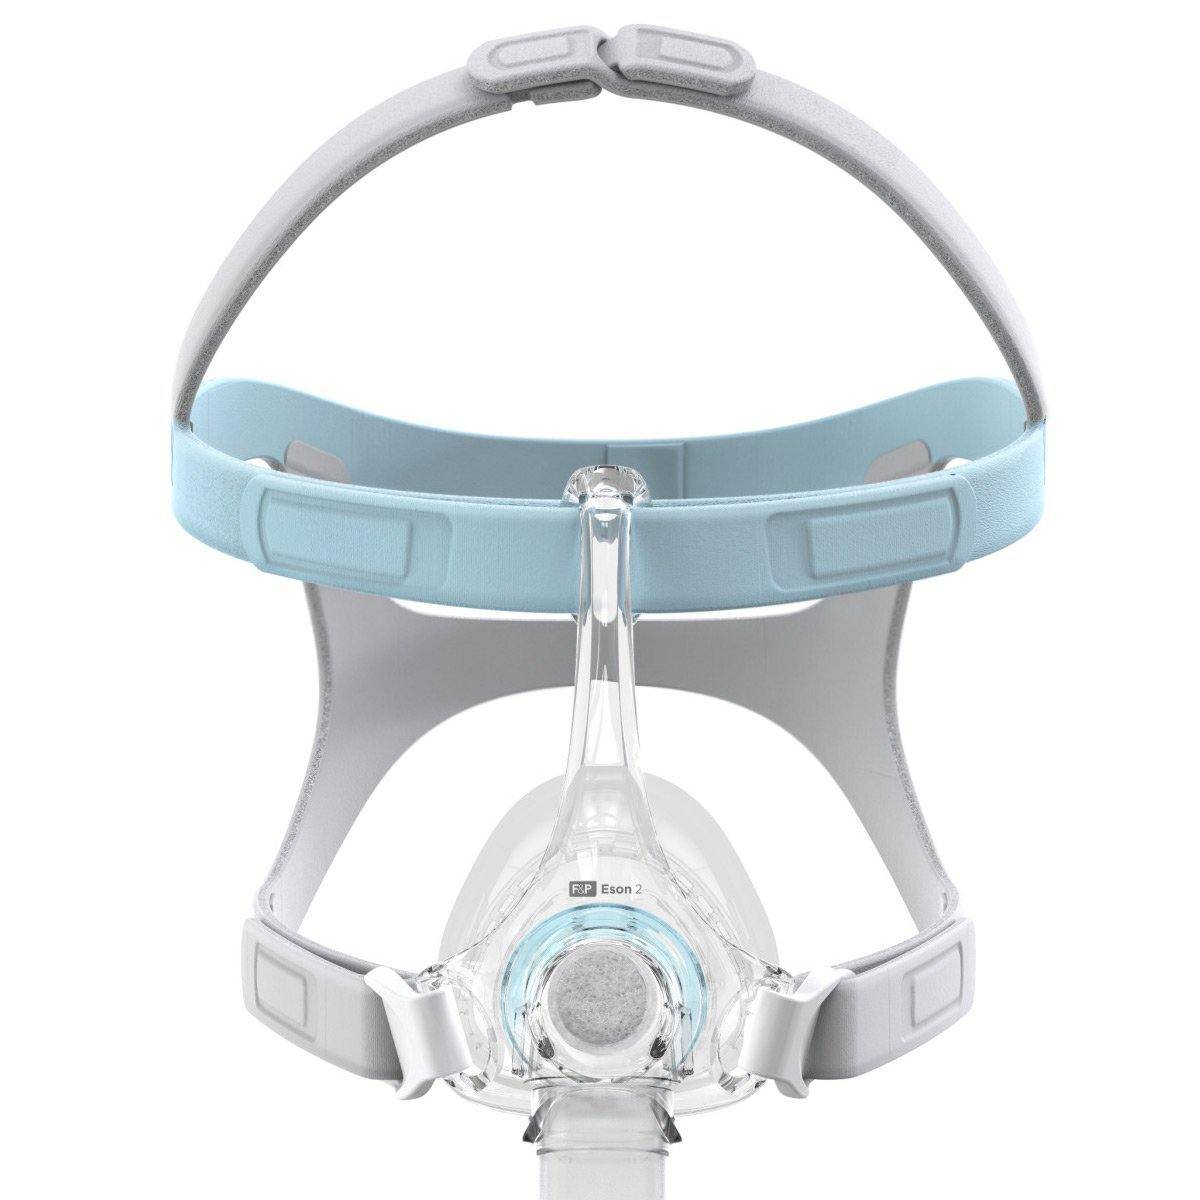 Eson 2 Fisher & Paykel Nasal CPAP Mask – USA Medical Supply